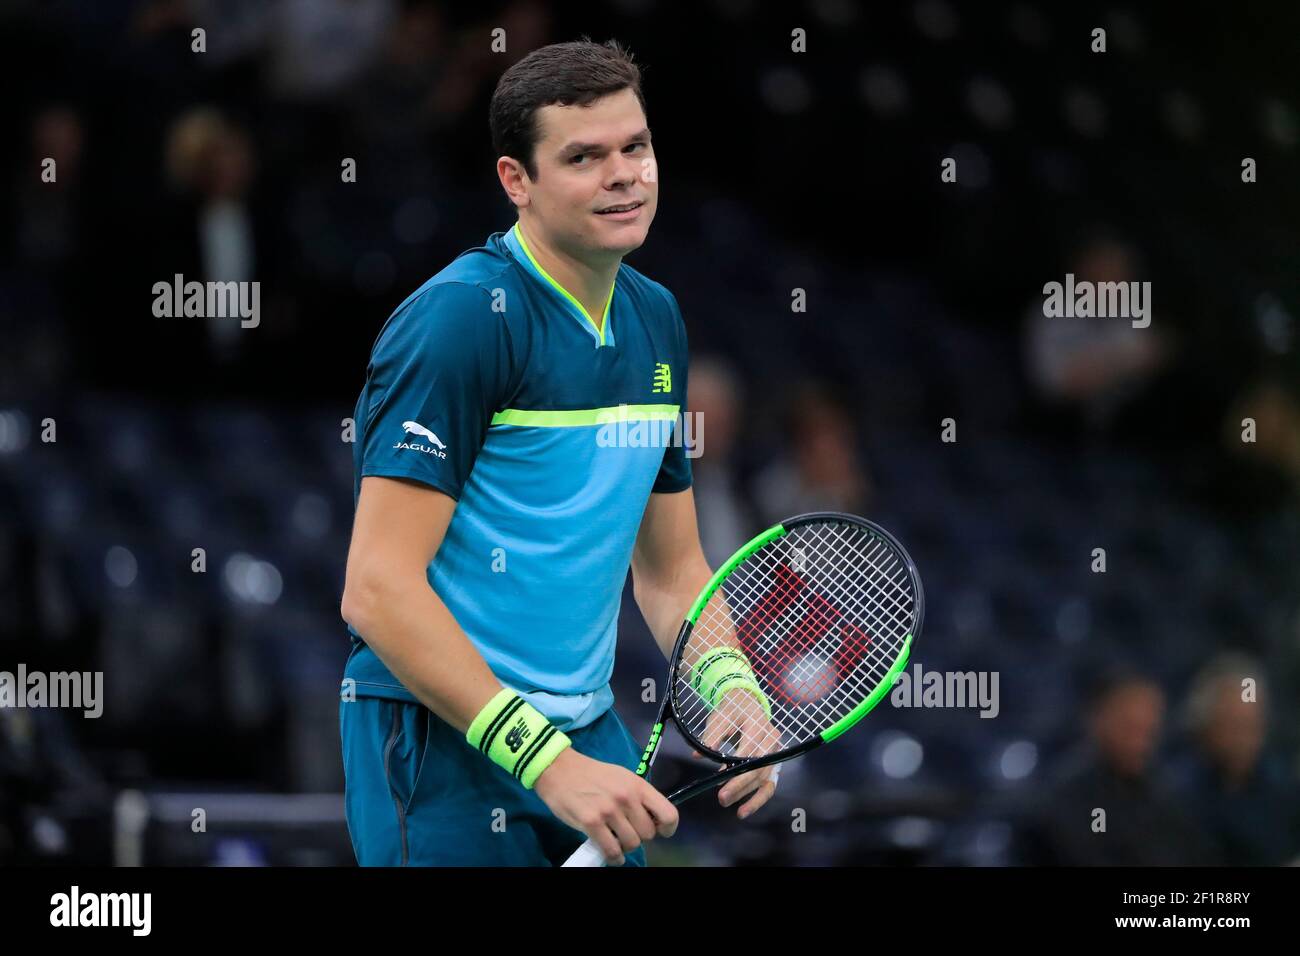 Milos RAONIC (CAN) during the Rolex Paris Masters Paris 2018 Tennis match  on October 30th, 2018 at AccorHotels Arena (Bercy) in Paris, France - Photo  Stephane Allaman / DPPI Stock Photo - Alamy